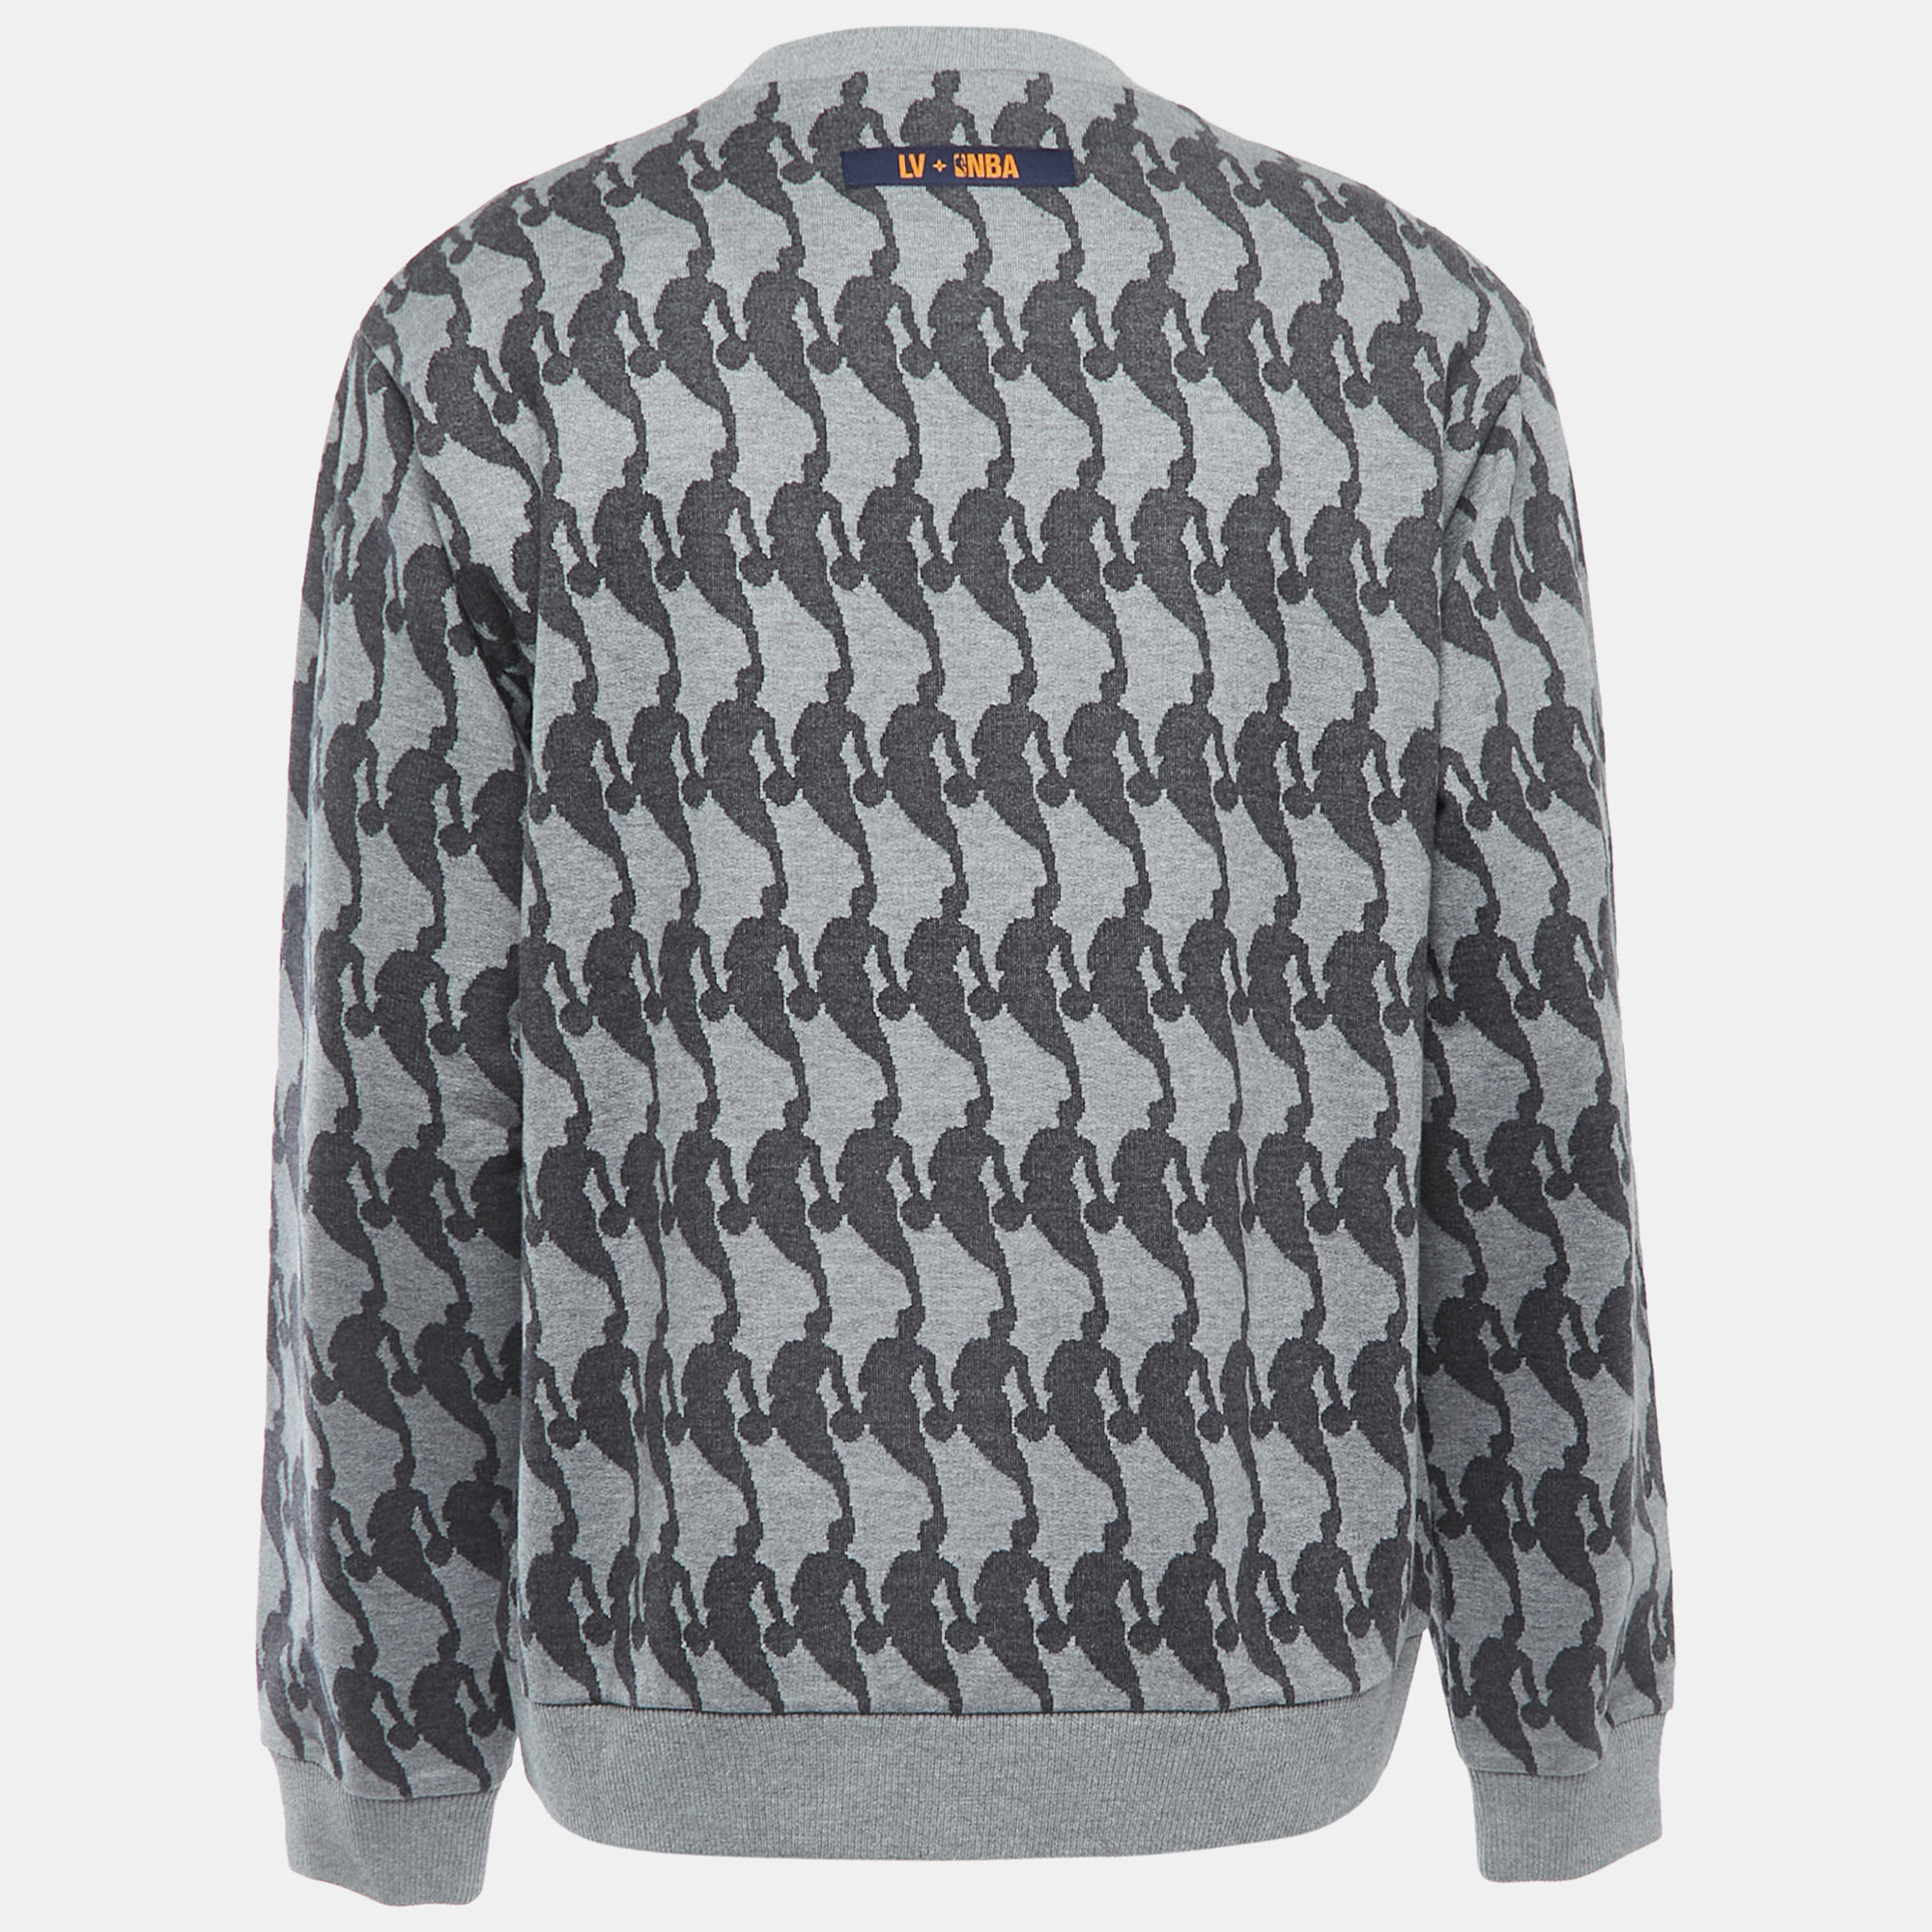 

Louis Vuitton Grey All-Over NBA Player Patterned Cotton Crew Neck Sweatshirt